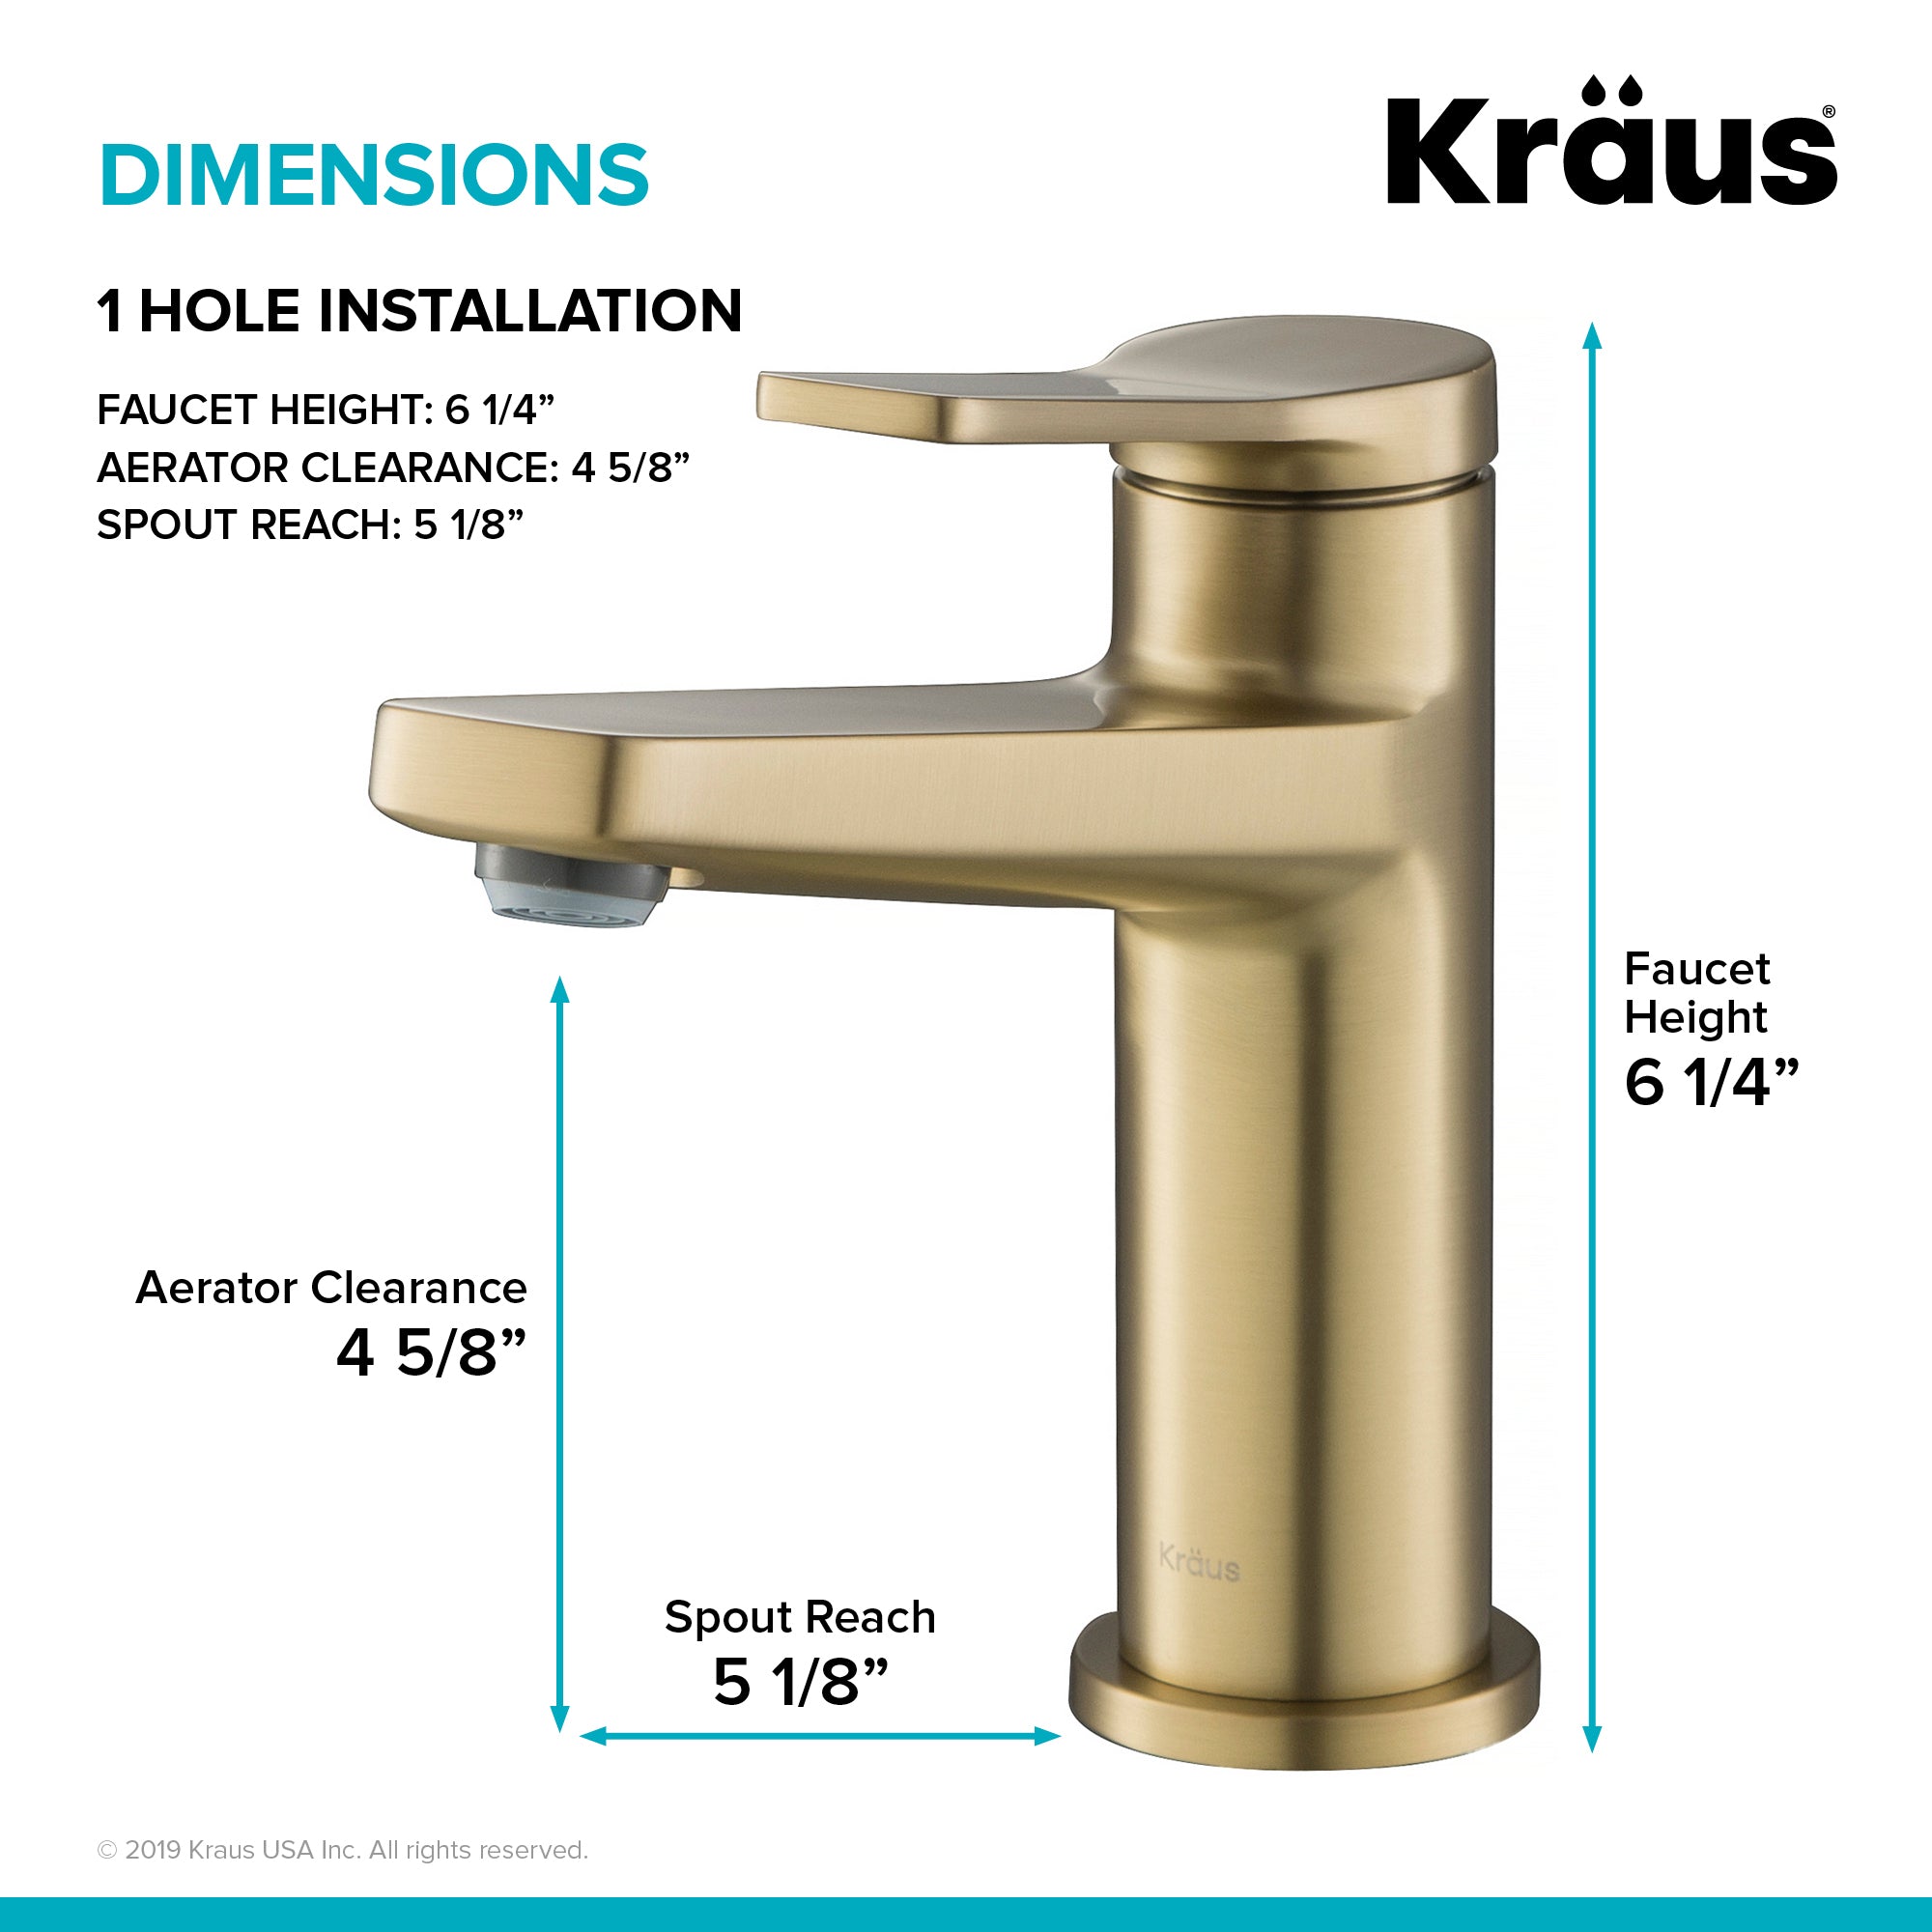 KRAUS Indy Single Handle Bathroom Faucet in Brushed Gold